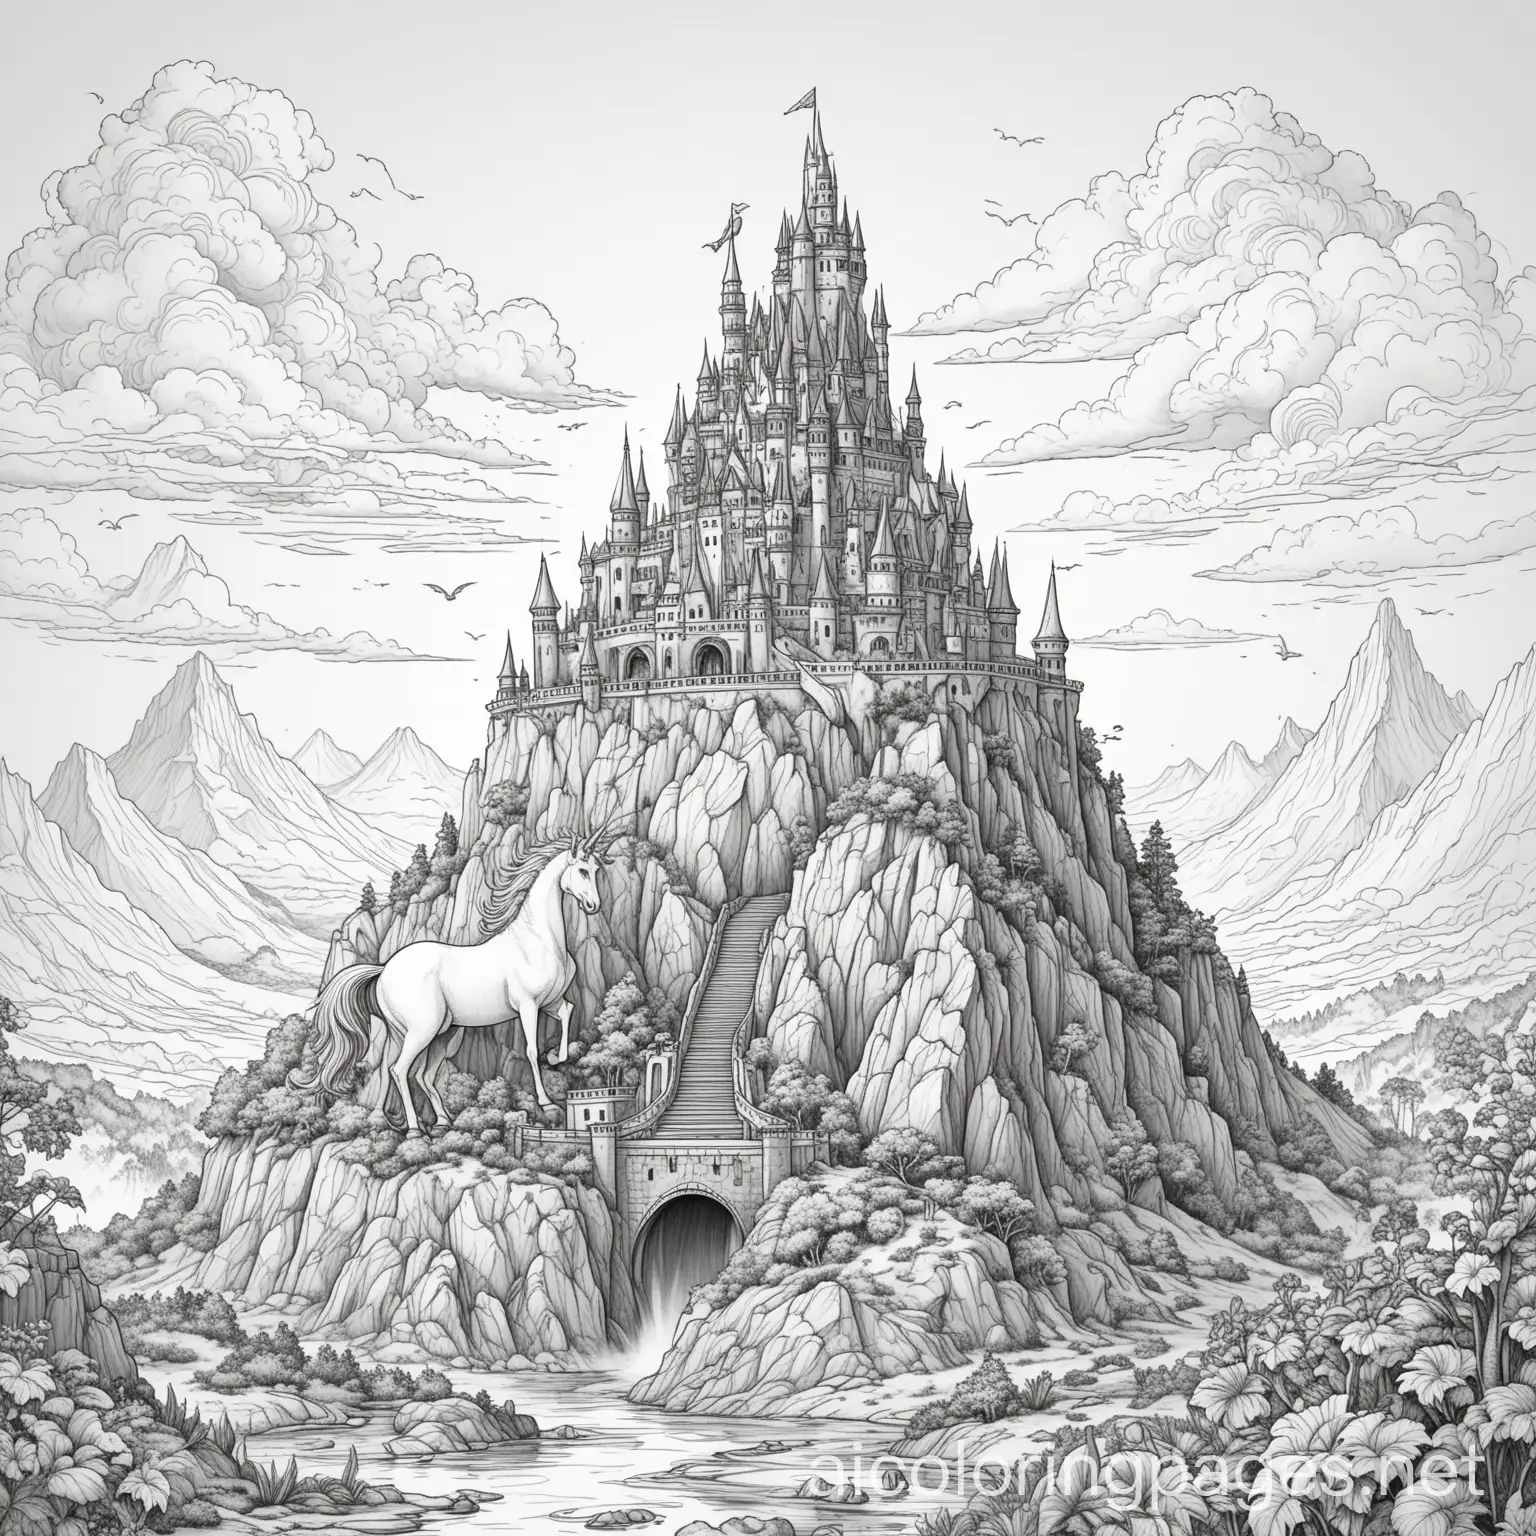 Unicorn dragon volcano  castle, Coloring Page, black and white, line art, white background, Simplicity, Ample White Space. The background of the coloring page is plain white to make it easy for young children to color within the lines. The outlines of all the subjects are easy to distinguish, making it simple for kids to color without too much difficulty